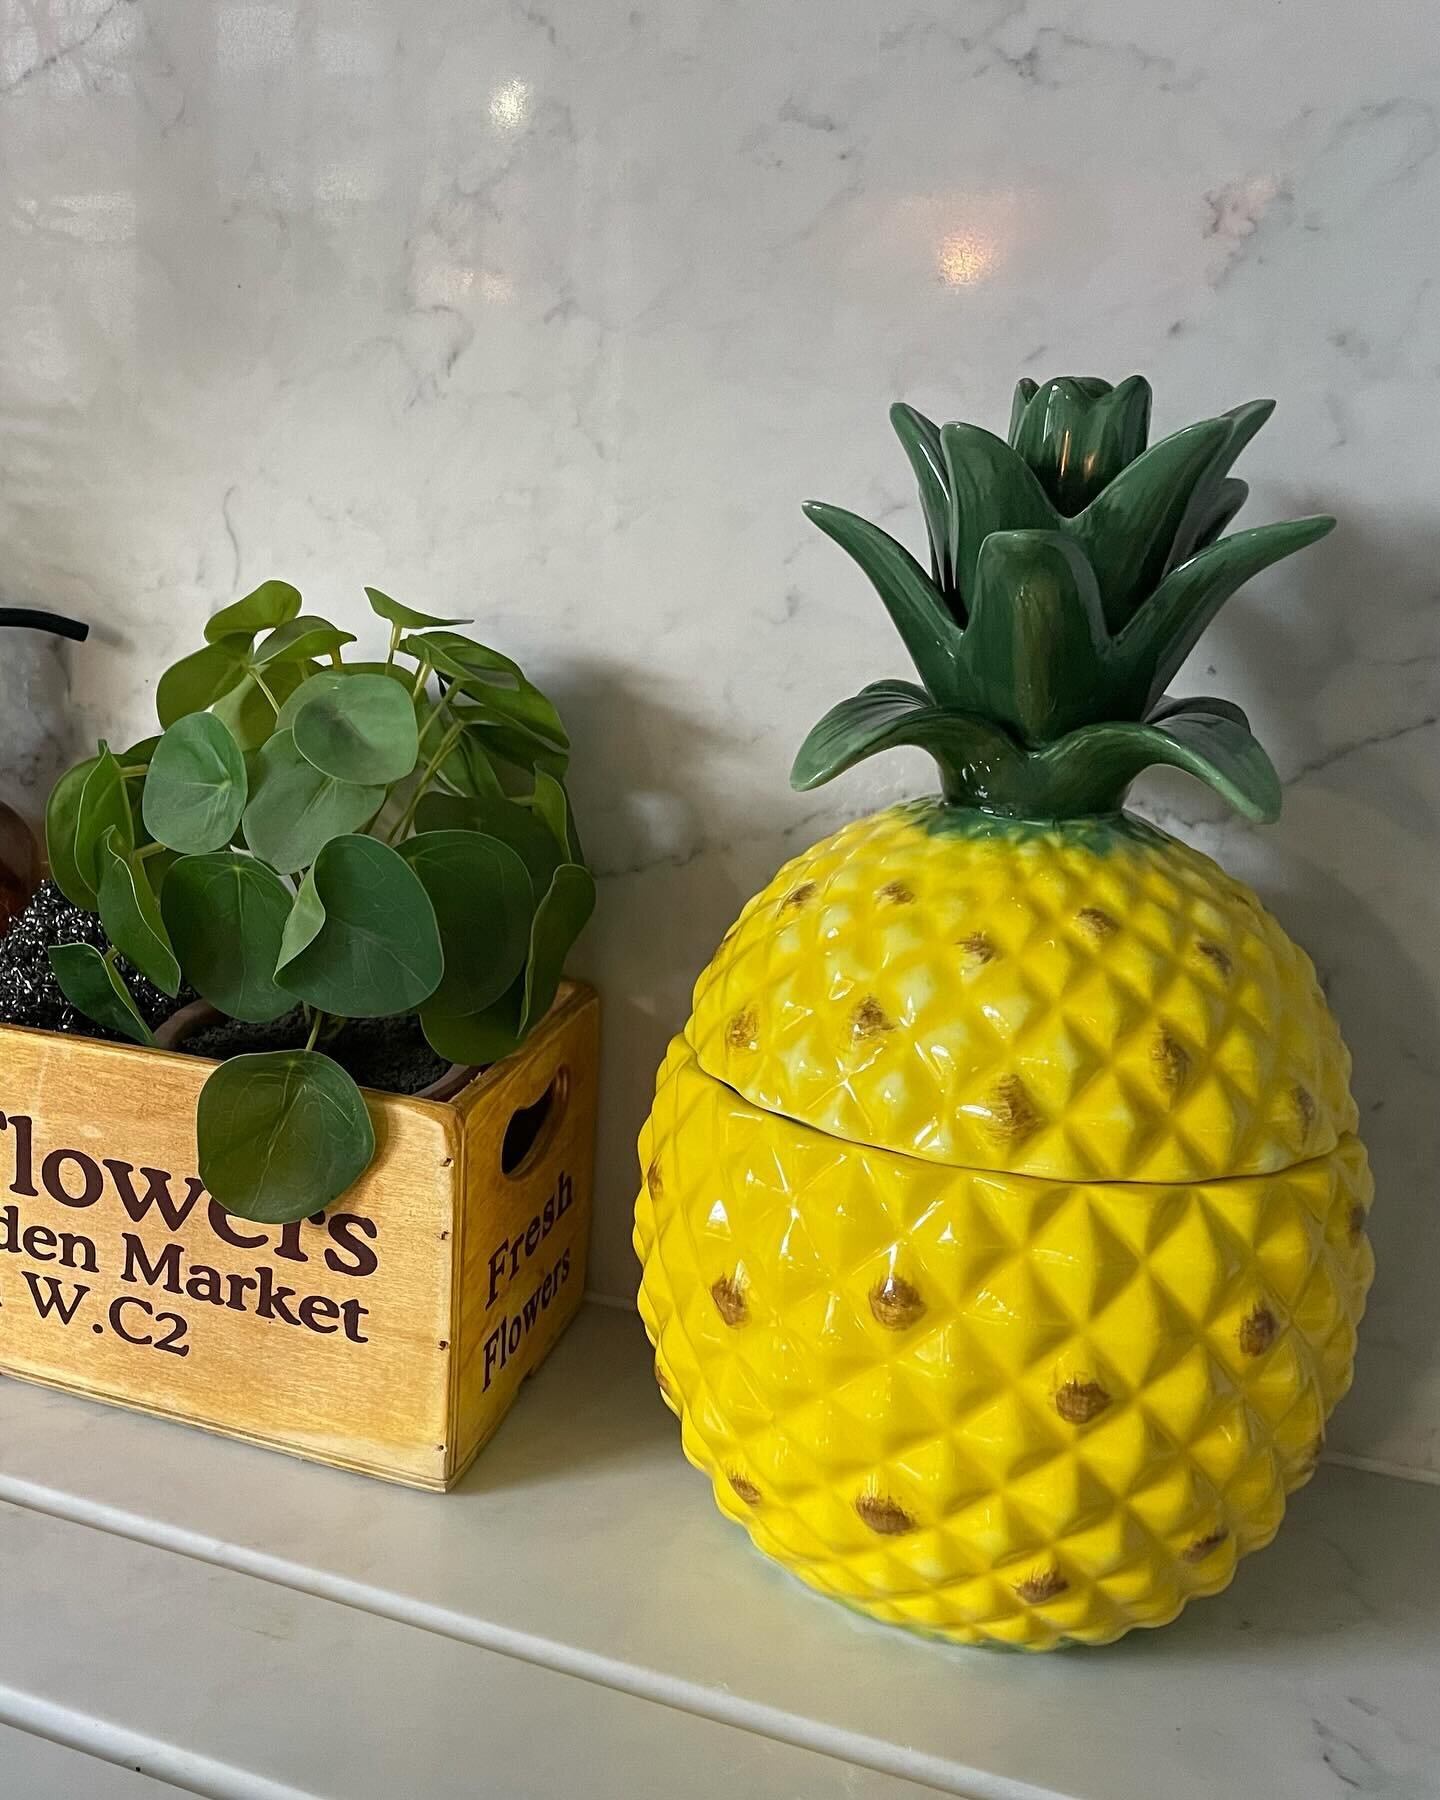 It&rsquo;s a juicy kind of Sunday! 🍍 

#pineapple #juicydecor #fruitdecor #quirkydecor #quirkyhome #quirkyhomedecor